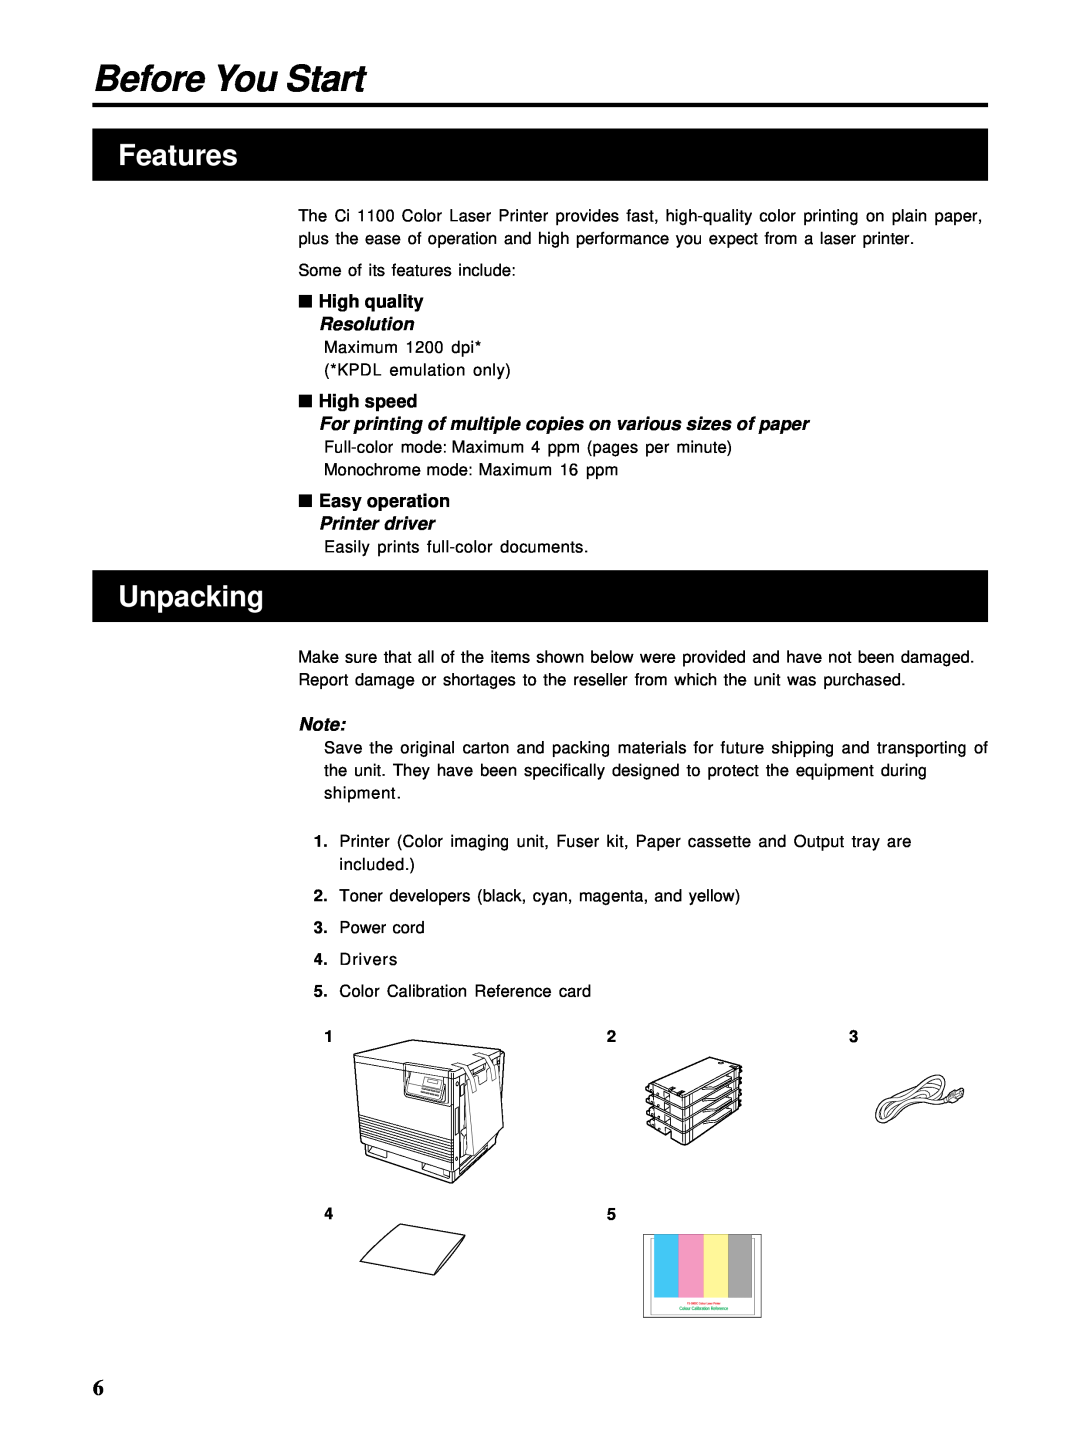 HP Ci 1100 manual Before You Start, Features, Unpacking, For printing of multiple copies on various sizes of paper 